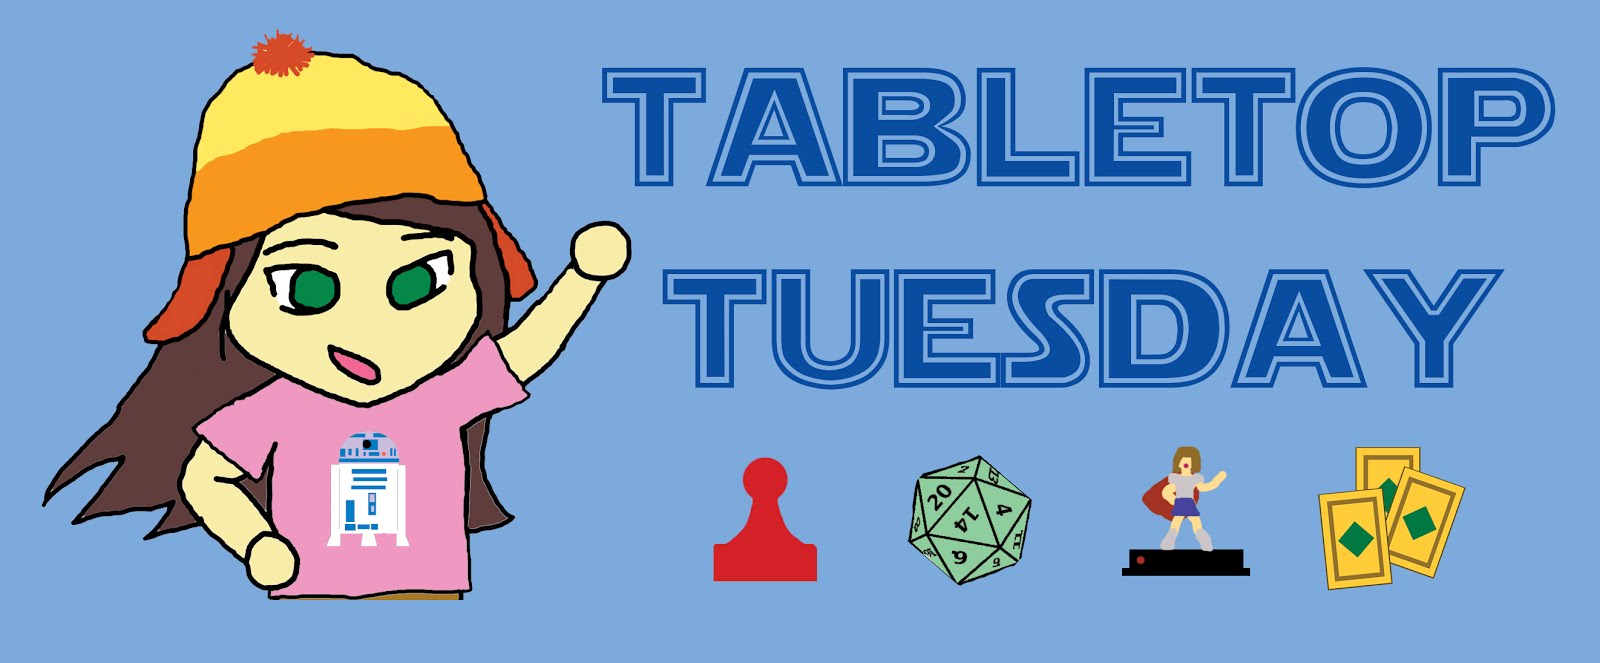 Tabletop Tuesday!